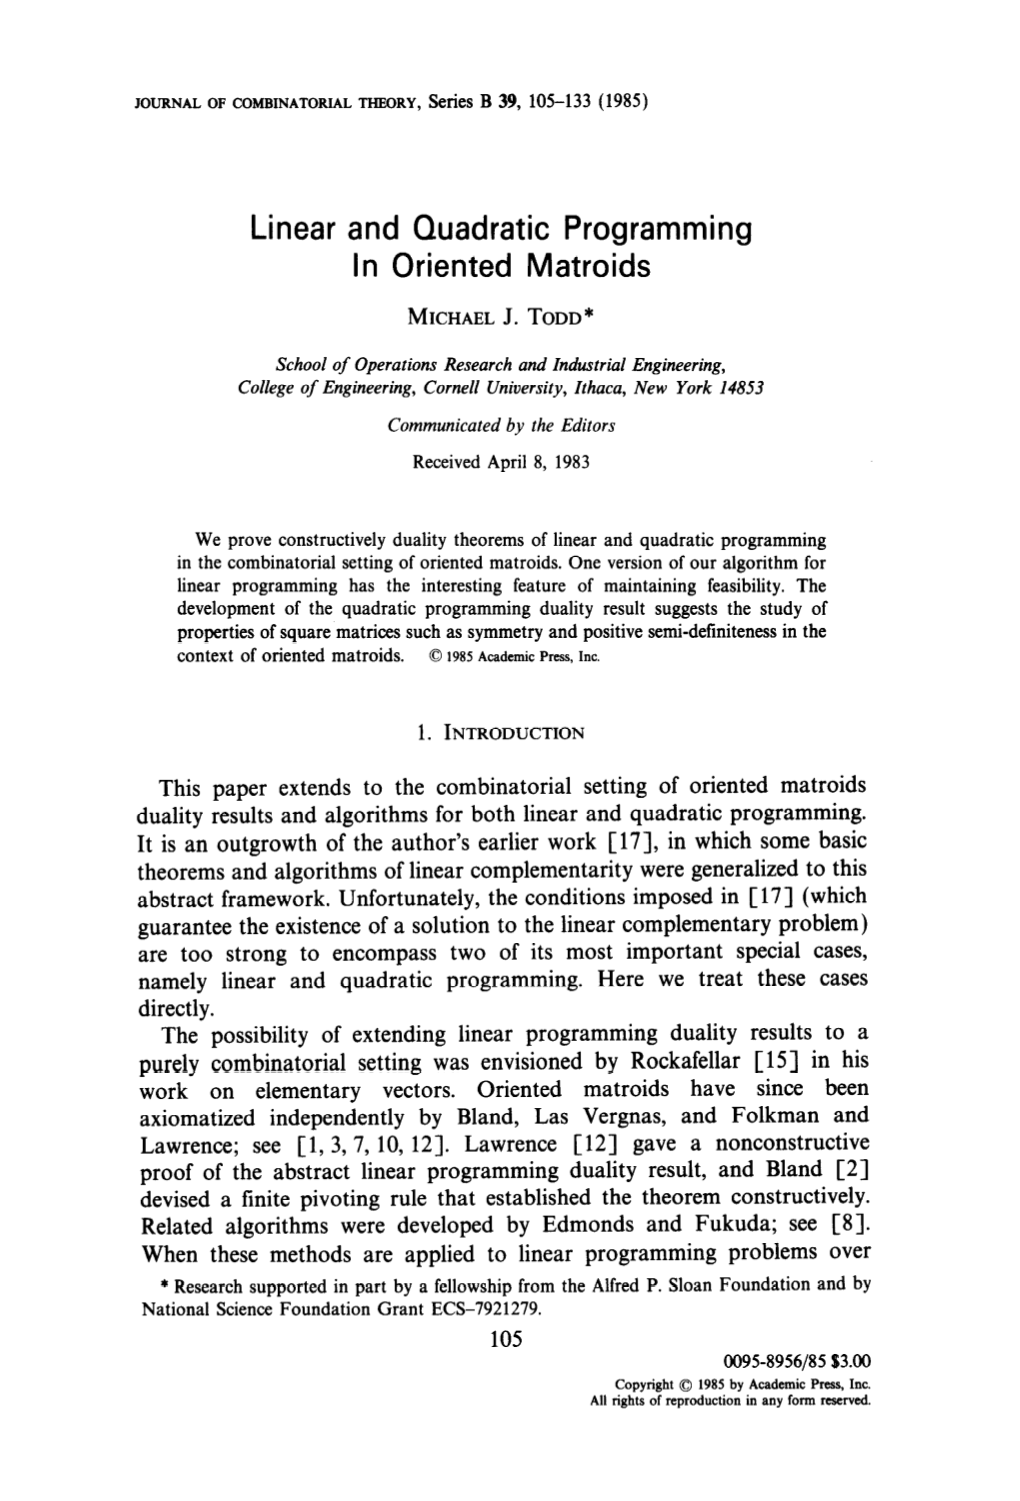 Linear and Quadratic Programming in Oriented Matroids